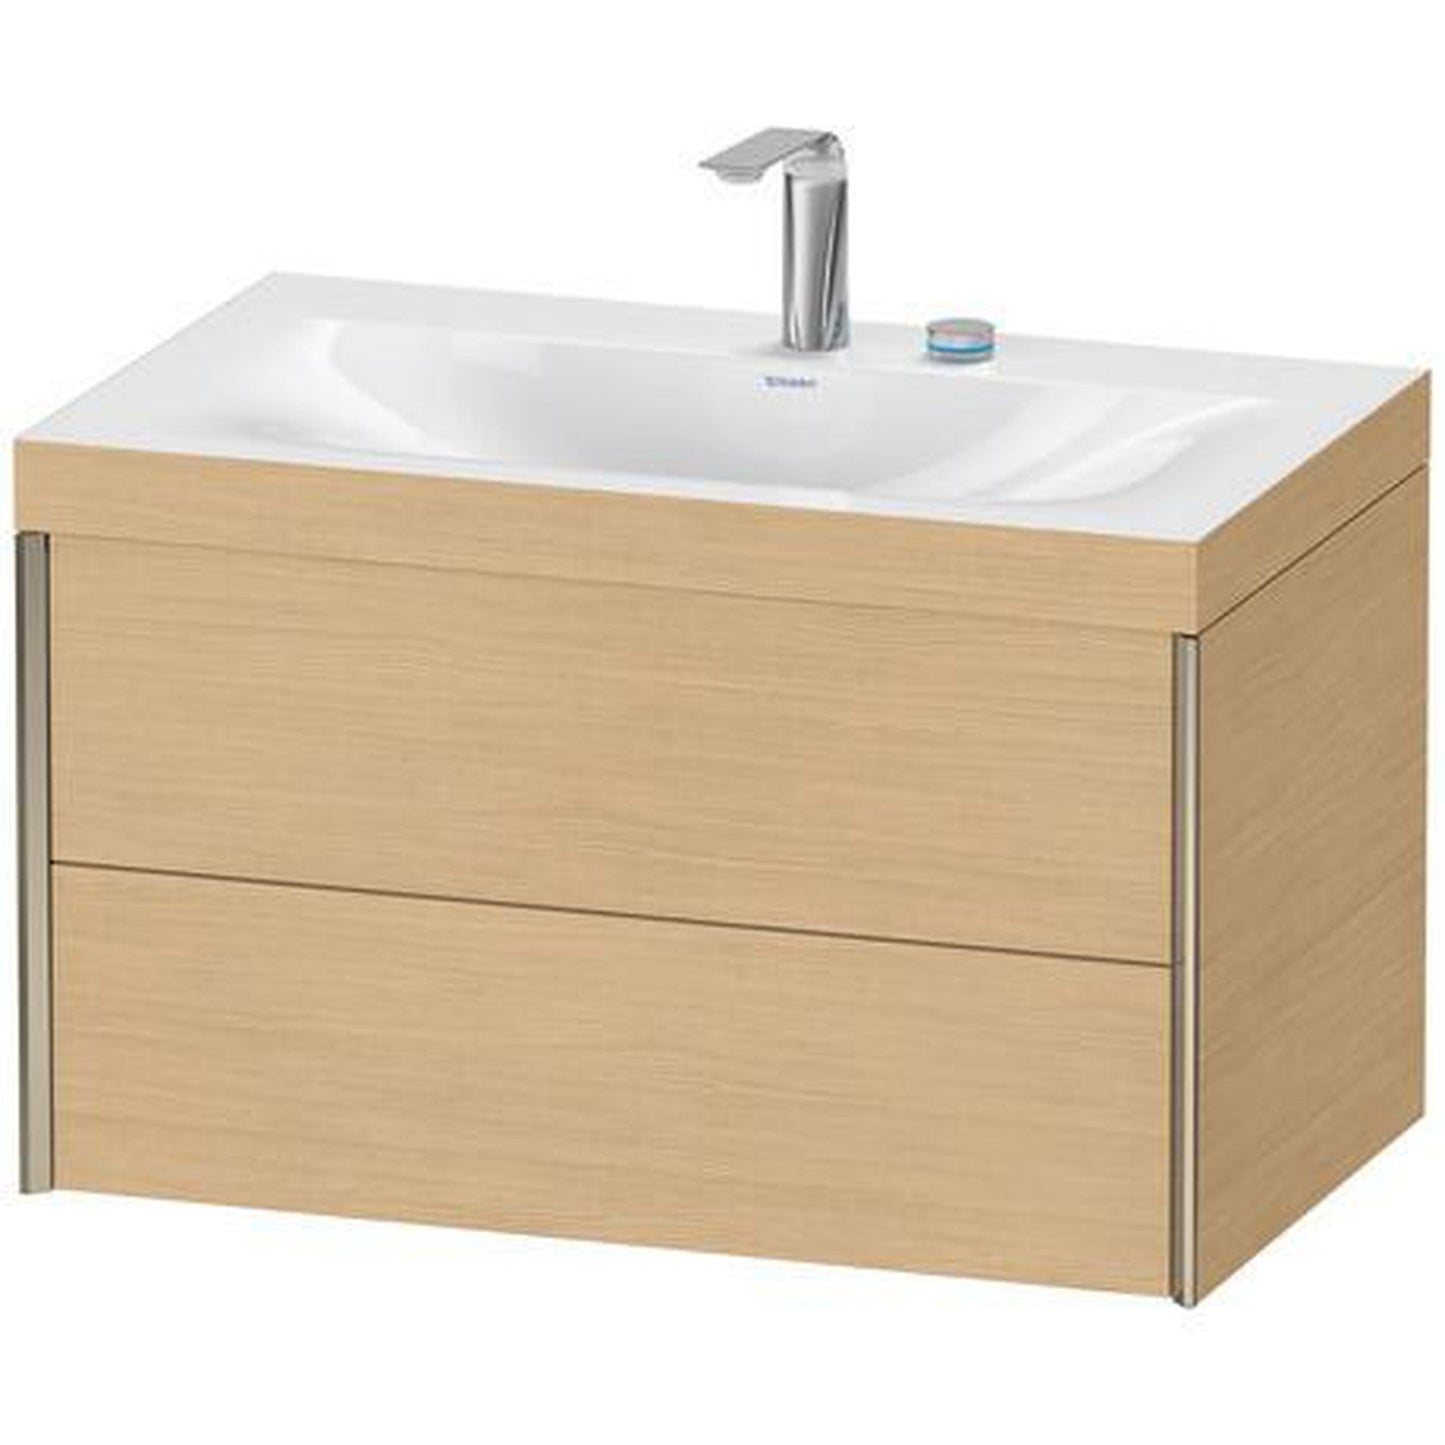 Duravit Xviu 31" x 20" x 19" Two Drawer C-Bonded Wall-Mount Vanity Kit With Two Tap Holes, Natural Oak (XV4615EB130C)